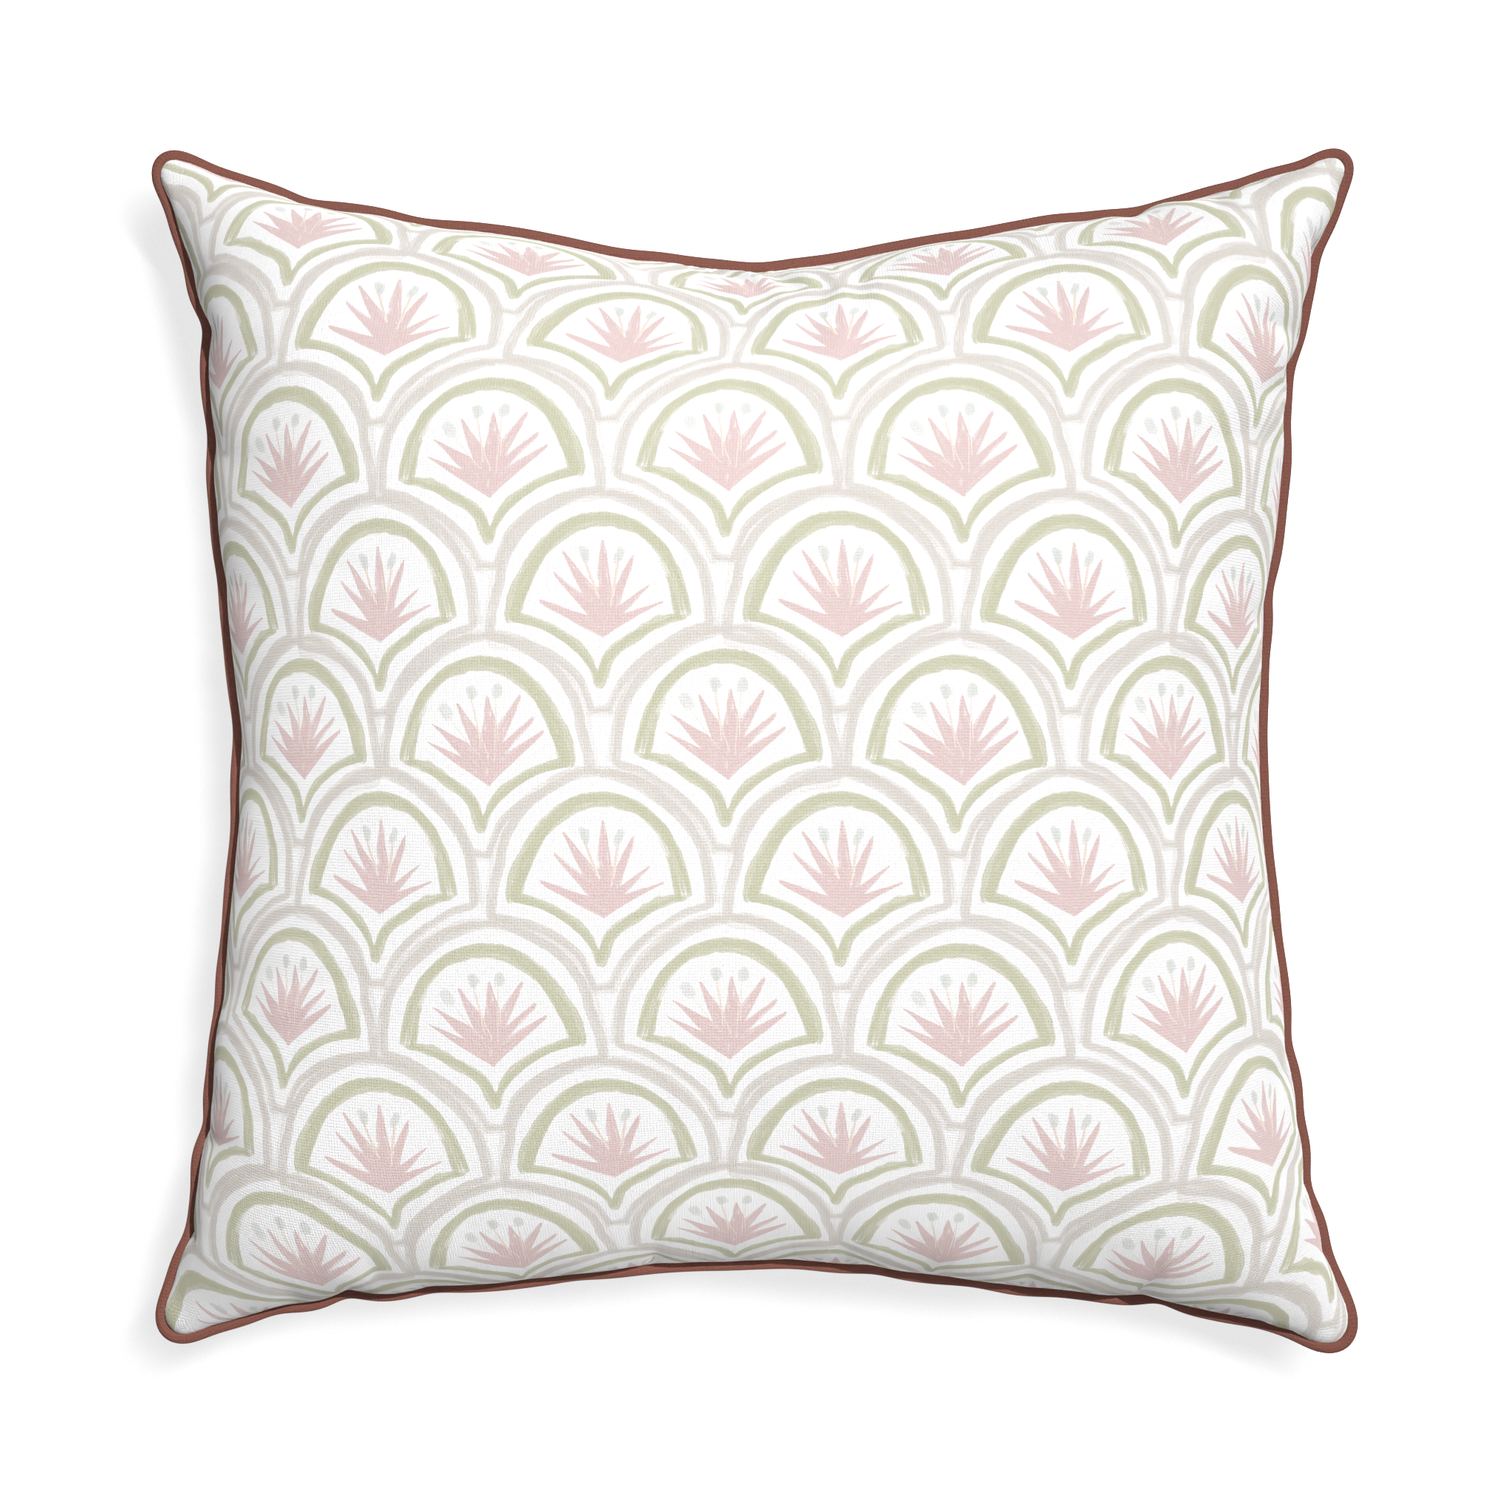 Euro-sham thatcher rose custom pink & green palmpillow with w piping on white background